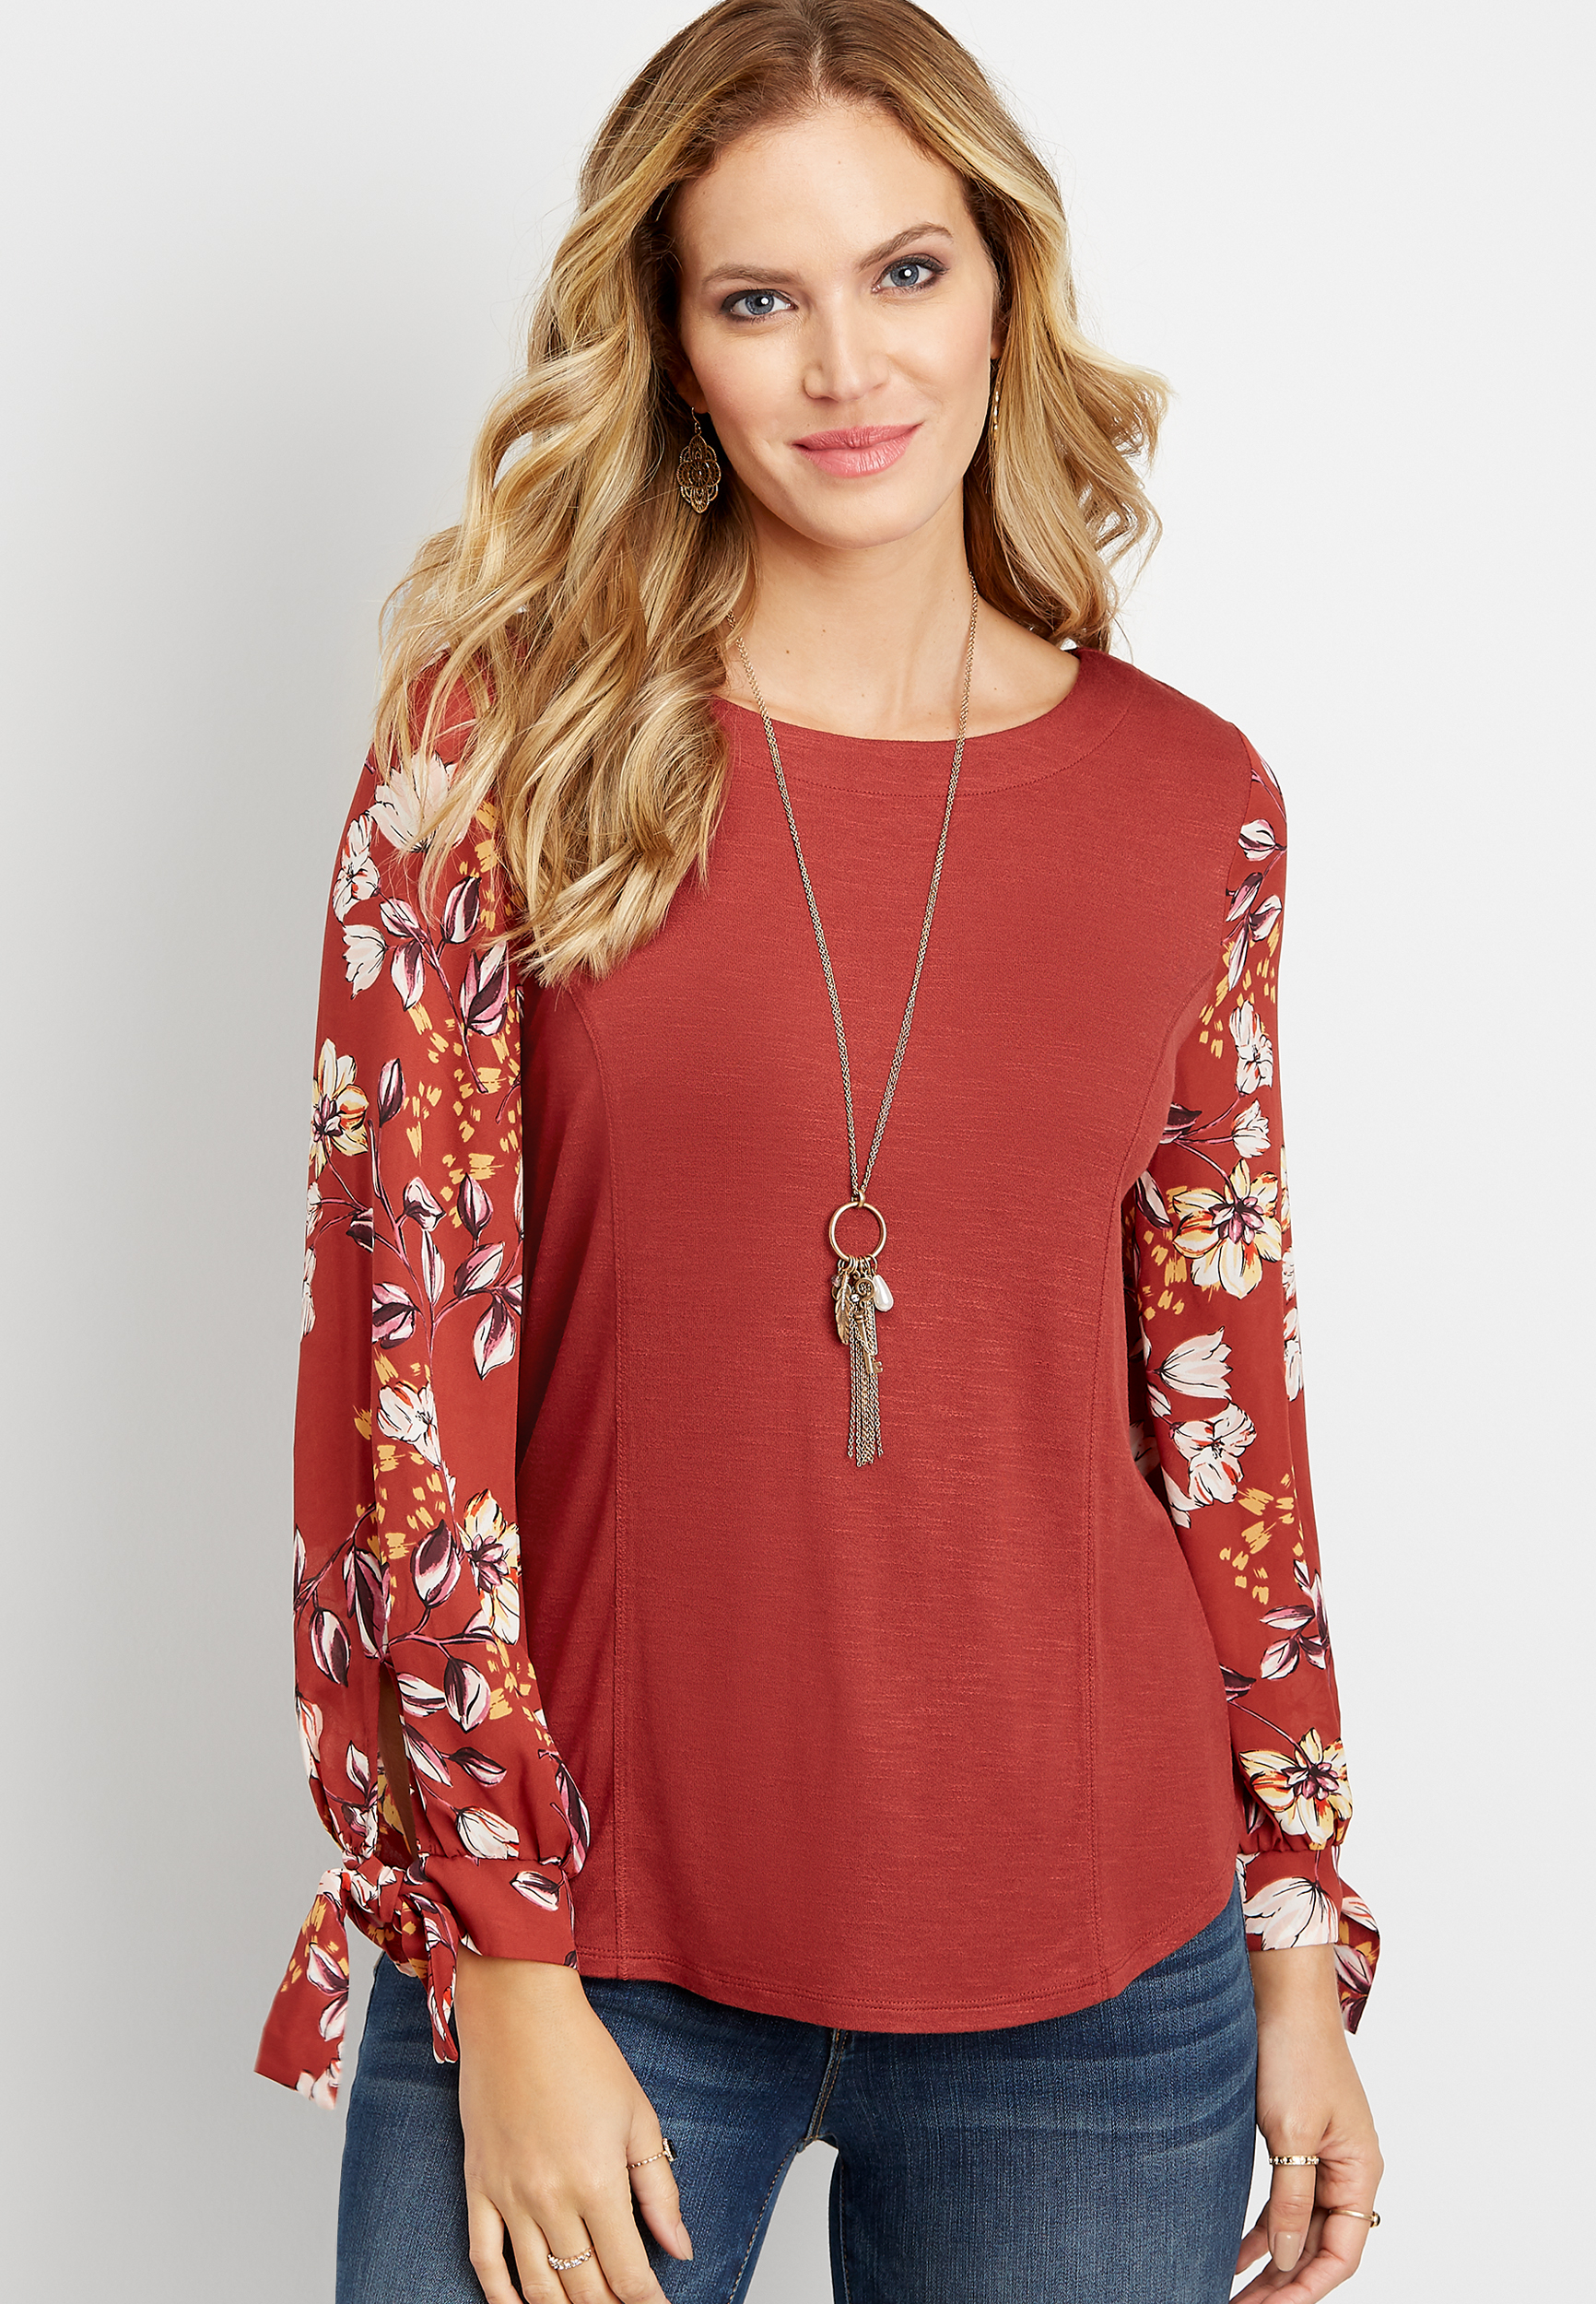 chiffon floral printed sleeve blouse | maurices